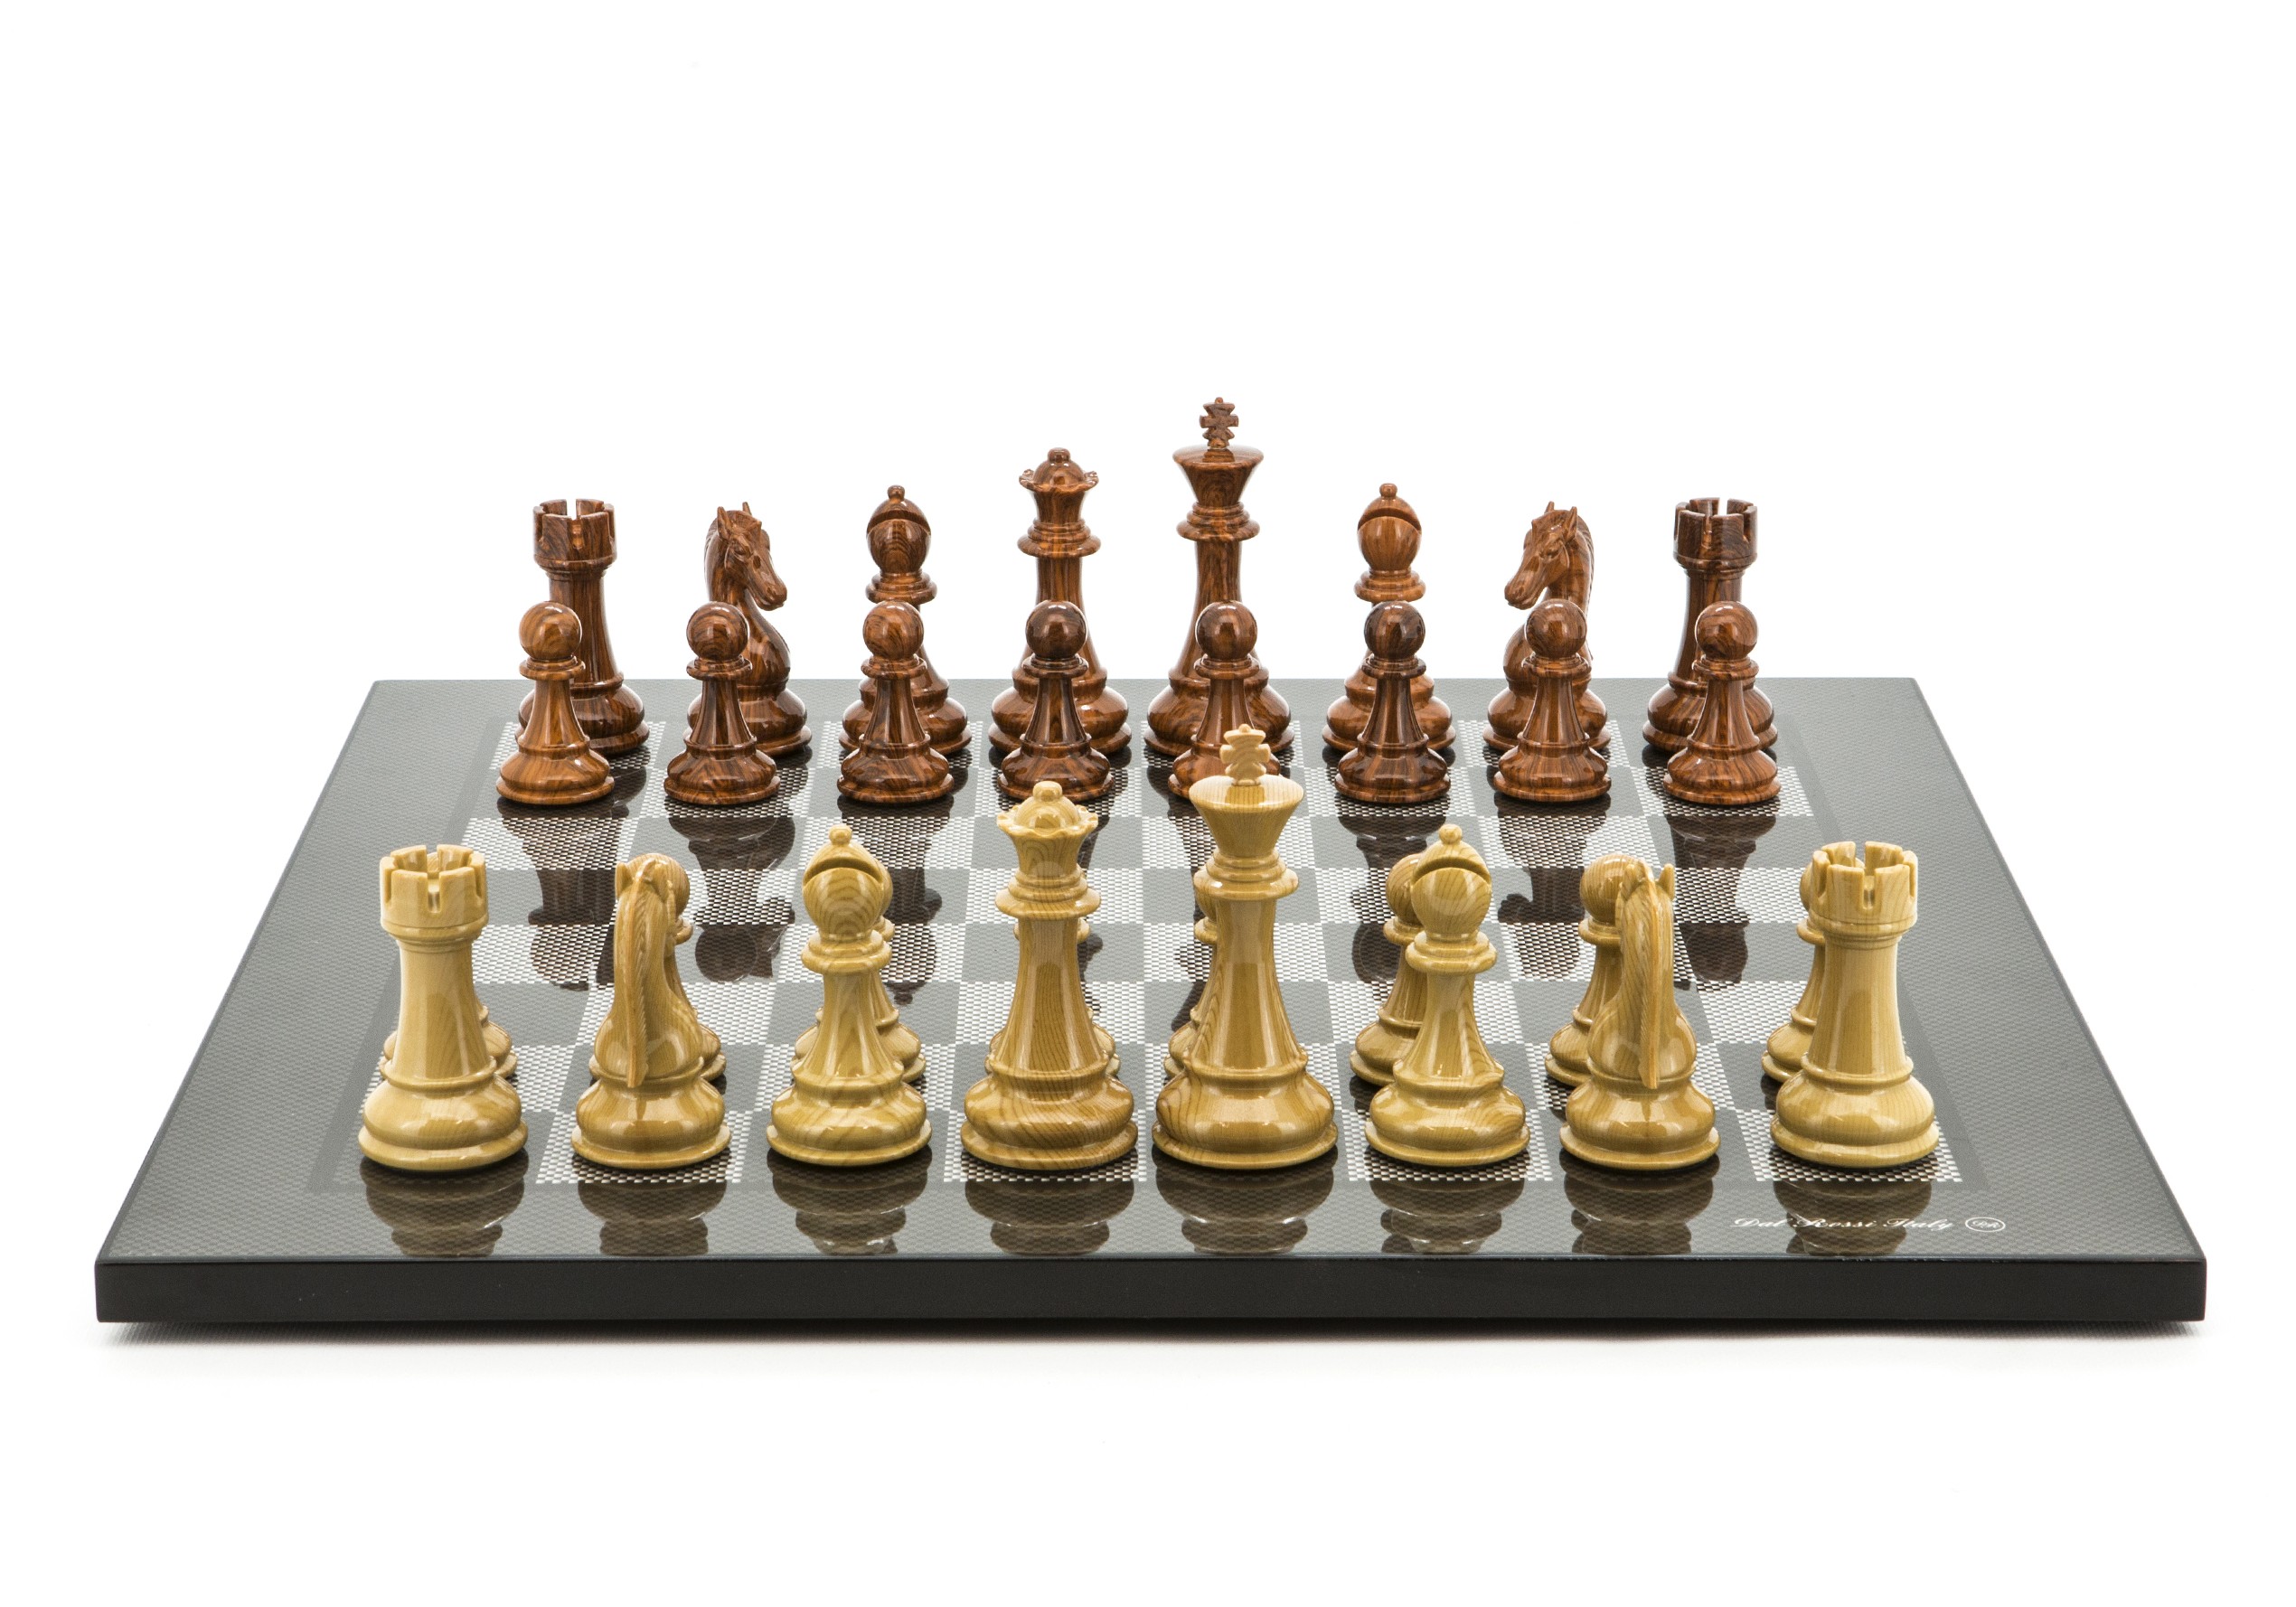 Dal Rossi Italy Chess Set Flat Carbon Fibre Board 50cm, Brown and Box Wood Grain Finish Chess Pieces 110mm